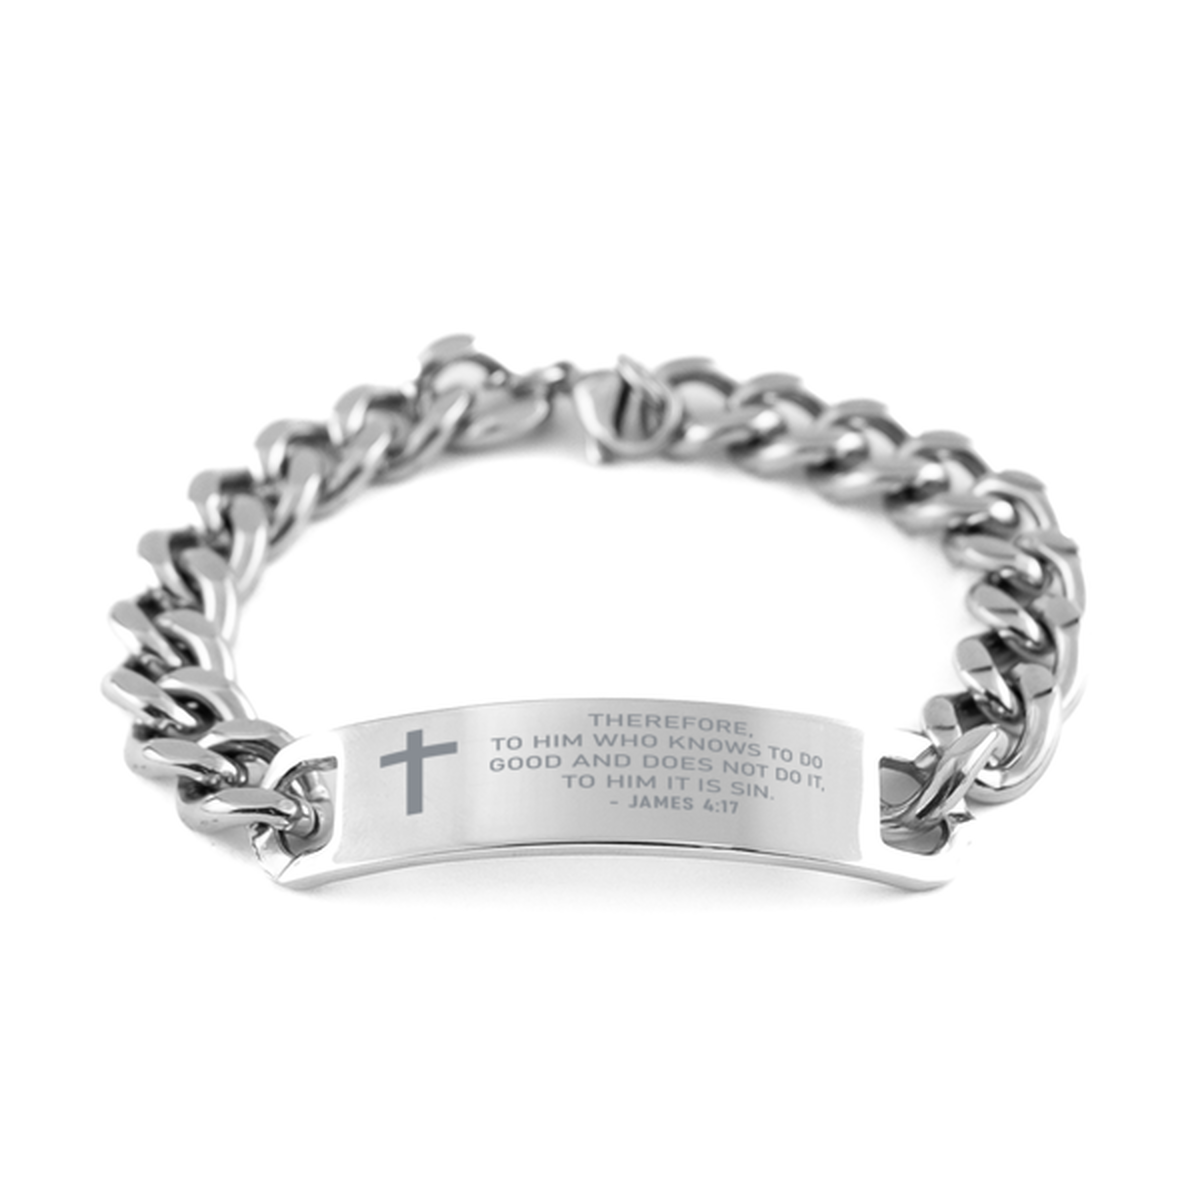 Bible Verse Chain Stainless Steel Bracelet, James 4:17 Therefore, To Him Who Knows To Do Good And Does, Inspirational Christian Gifts For Men Women